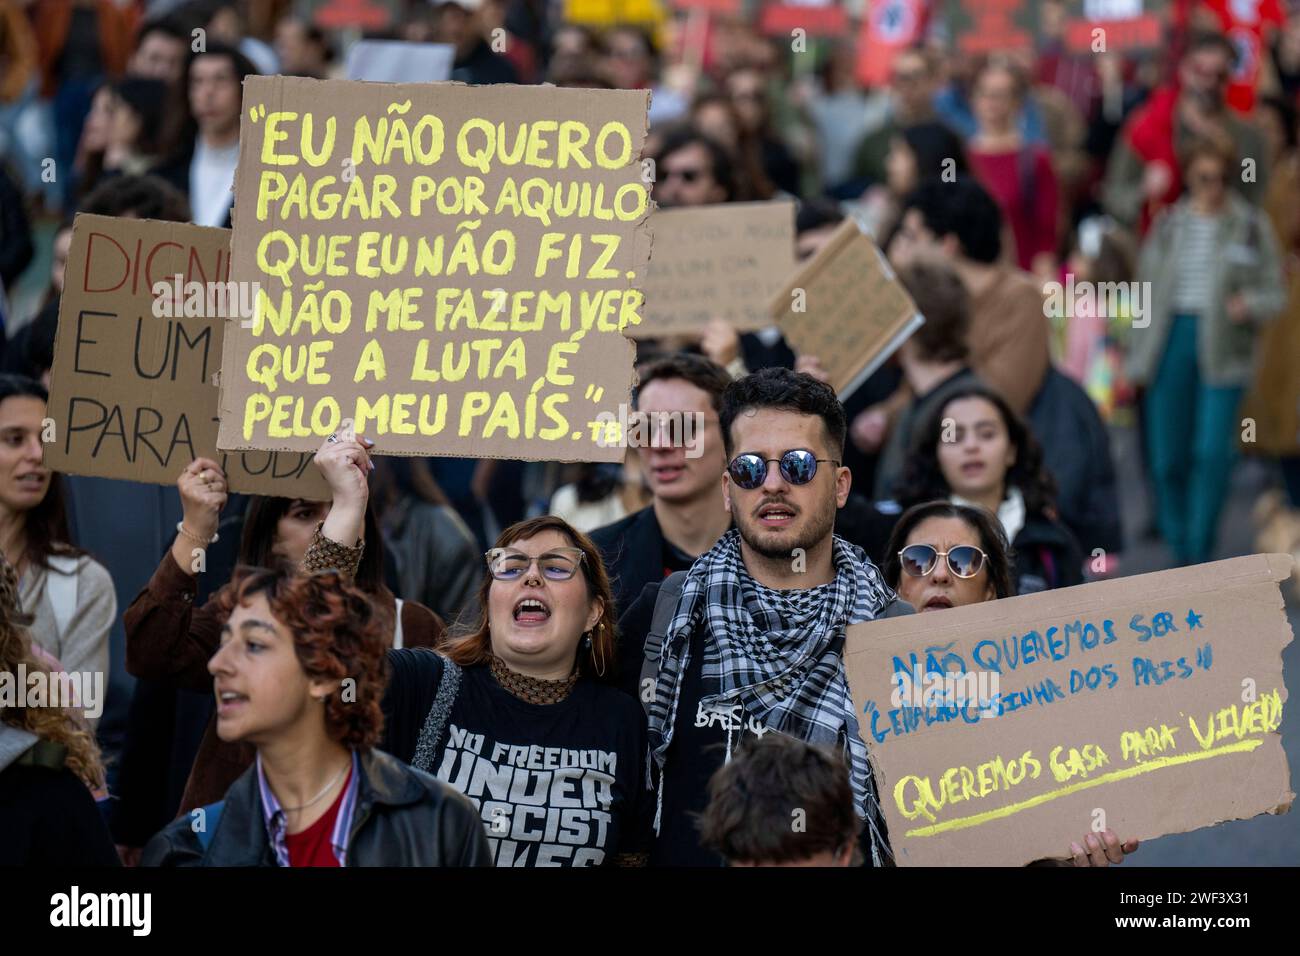 Protesters chant slogans while holding placards during the demonstration. In Portugal, 19 cities demonstrated in order to defense the right to housing, due to the disproportionate increase in the price of housing, the few possibilities to obtain a fair house rent, the real estate crisis that is shaking the country and the little resolution that the government is giving to these situations. This event was organized by the platform Casas para Viver (houses to live in) which brings together all the collectives of social struggle in favor of decent housing. (Photo by Jorge Castellanos/SOPA Image Stock Photo